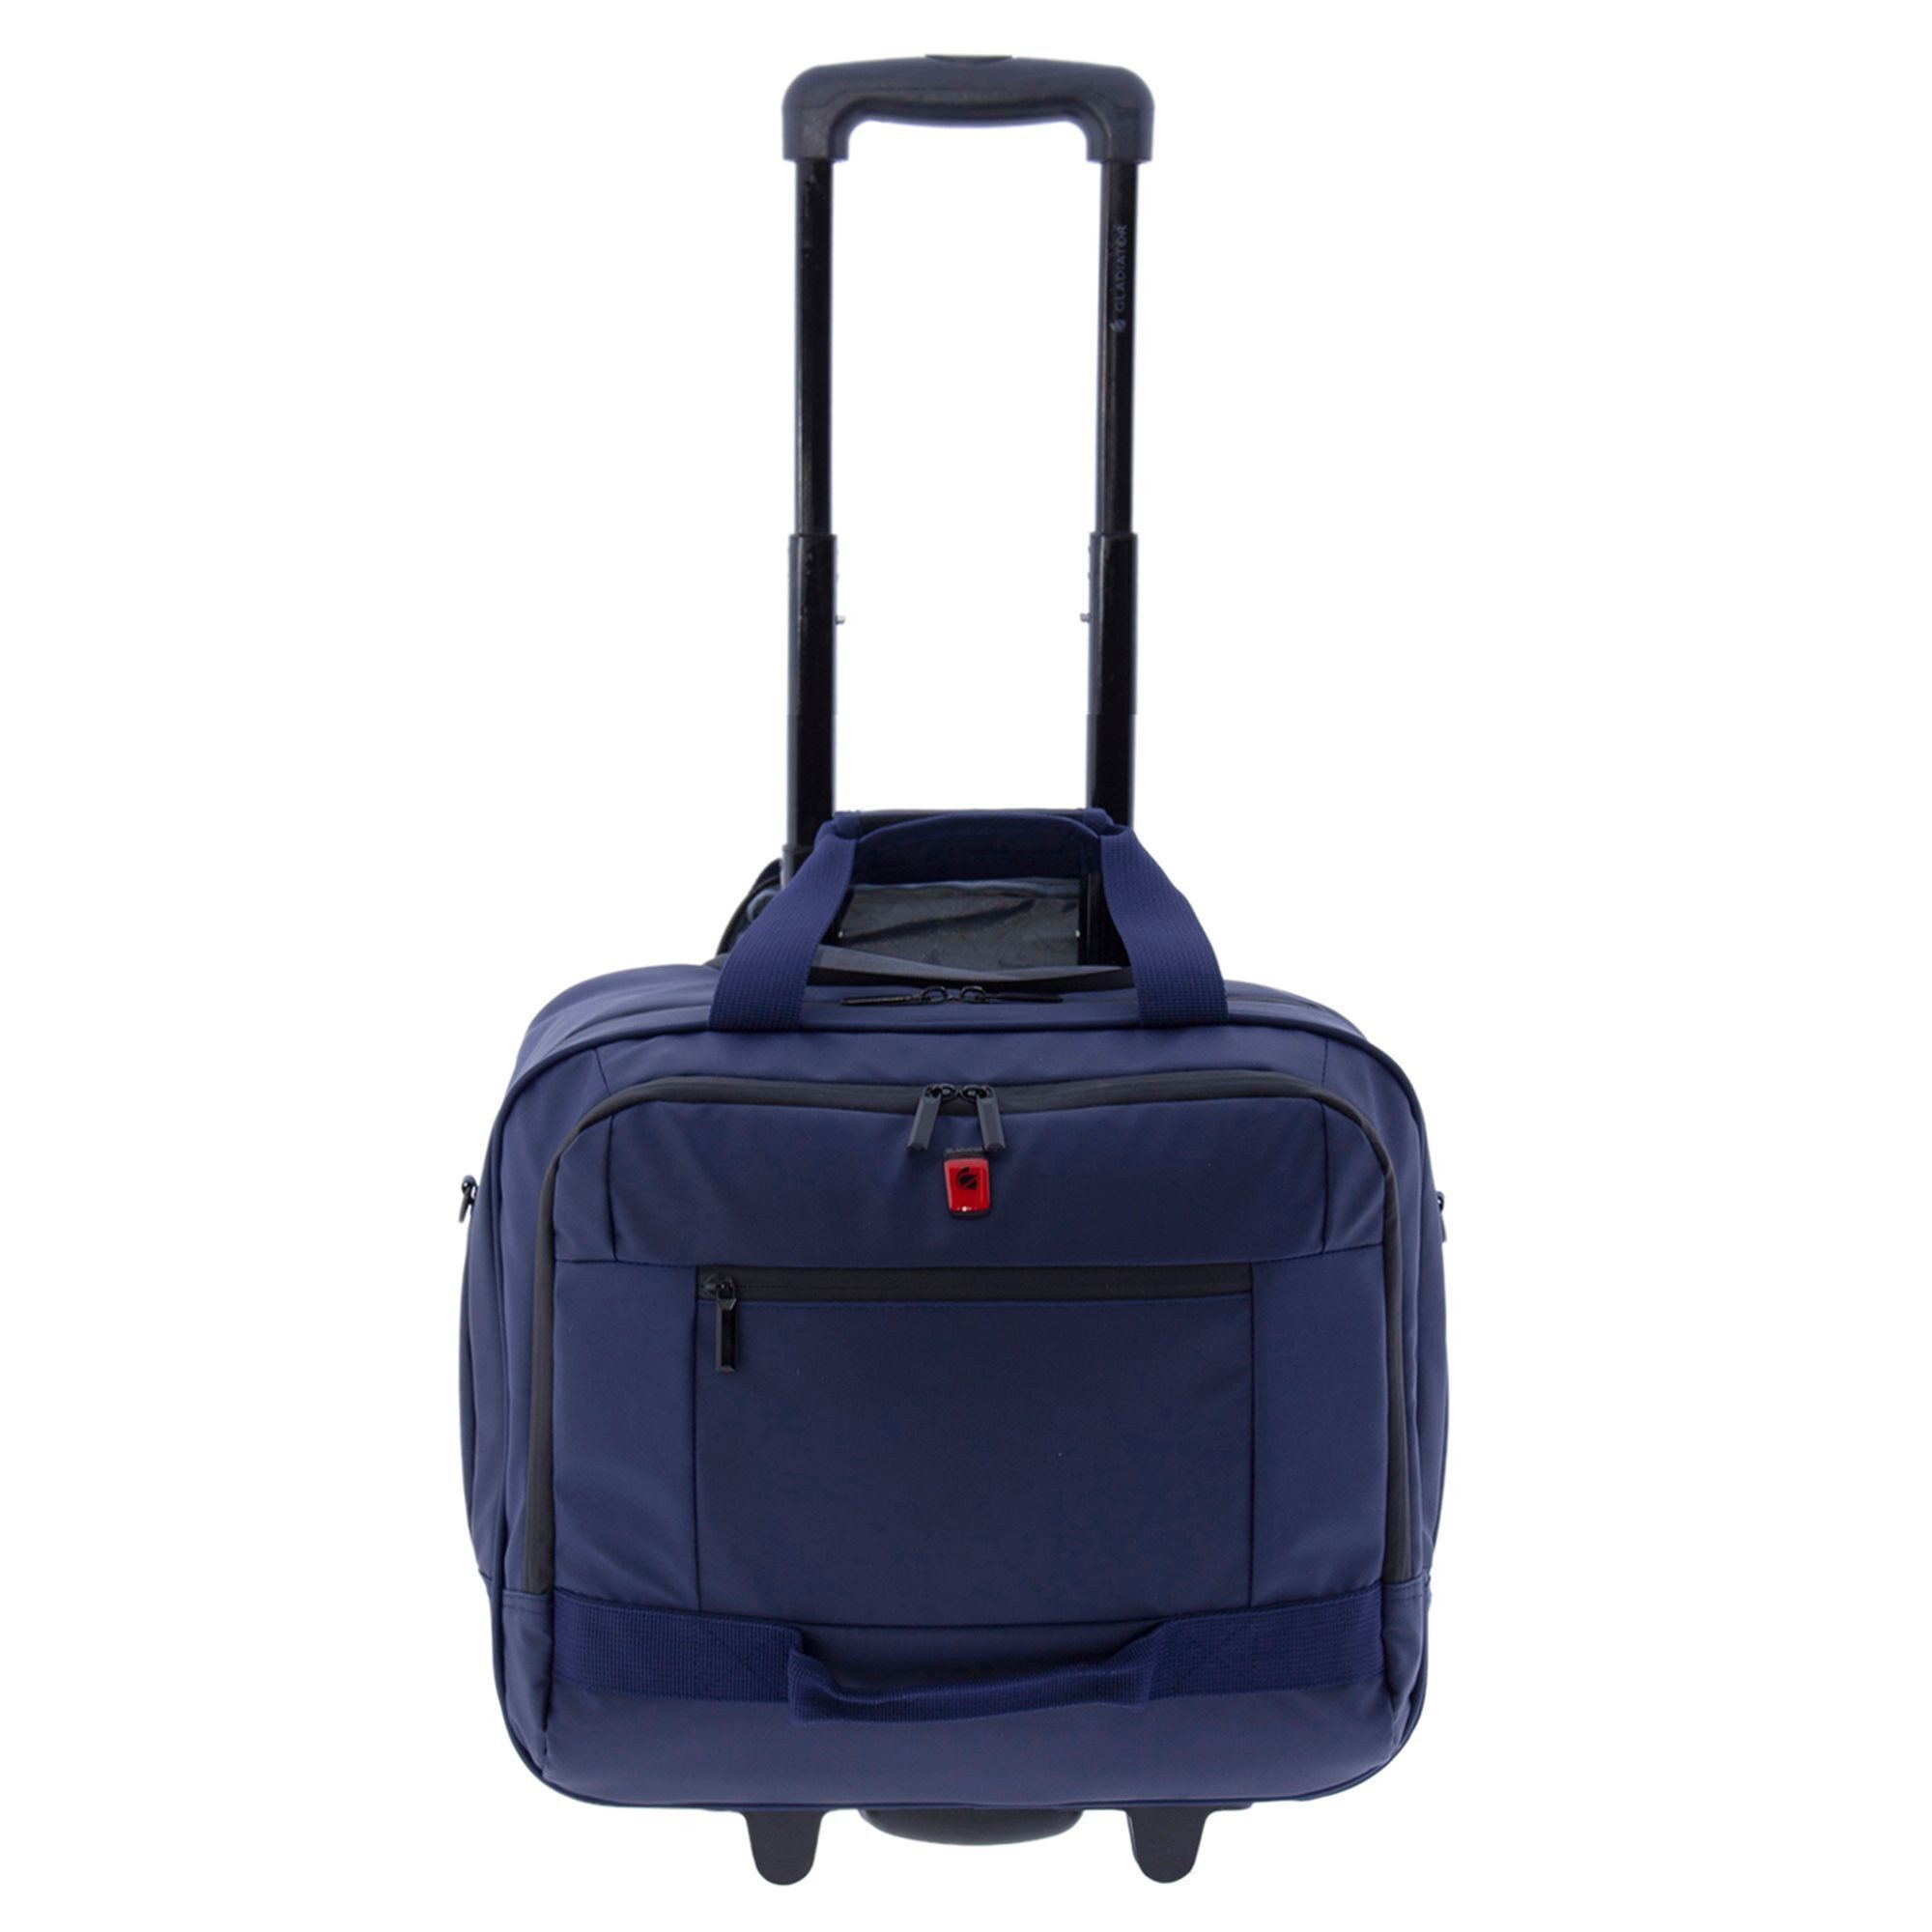 GLADIATOR Business-Trolley 3900, 2 Rollen, Polyester